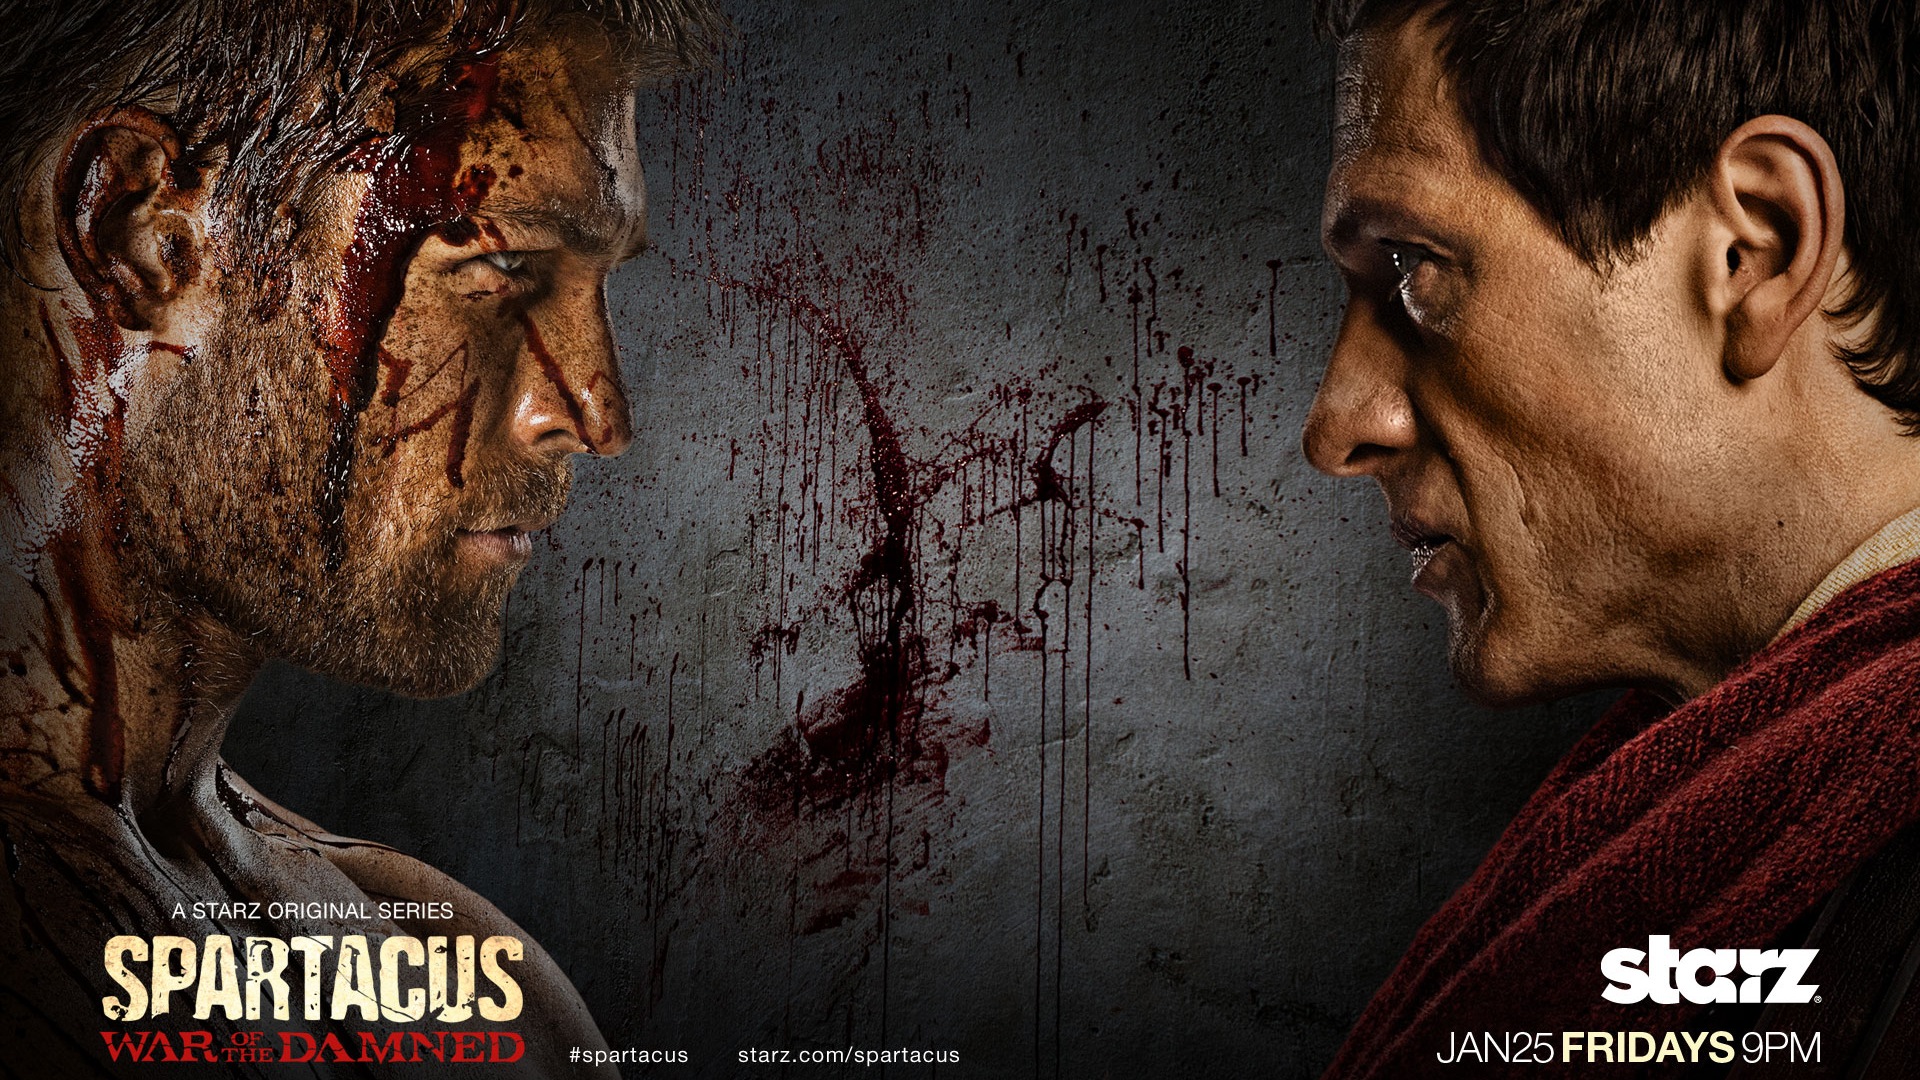 Spartacus: War of the Damned HD Wallpaper #12 - 1920x1080